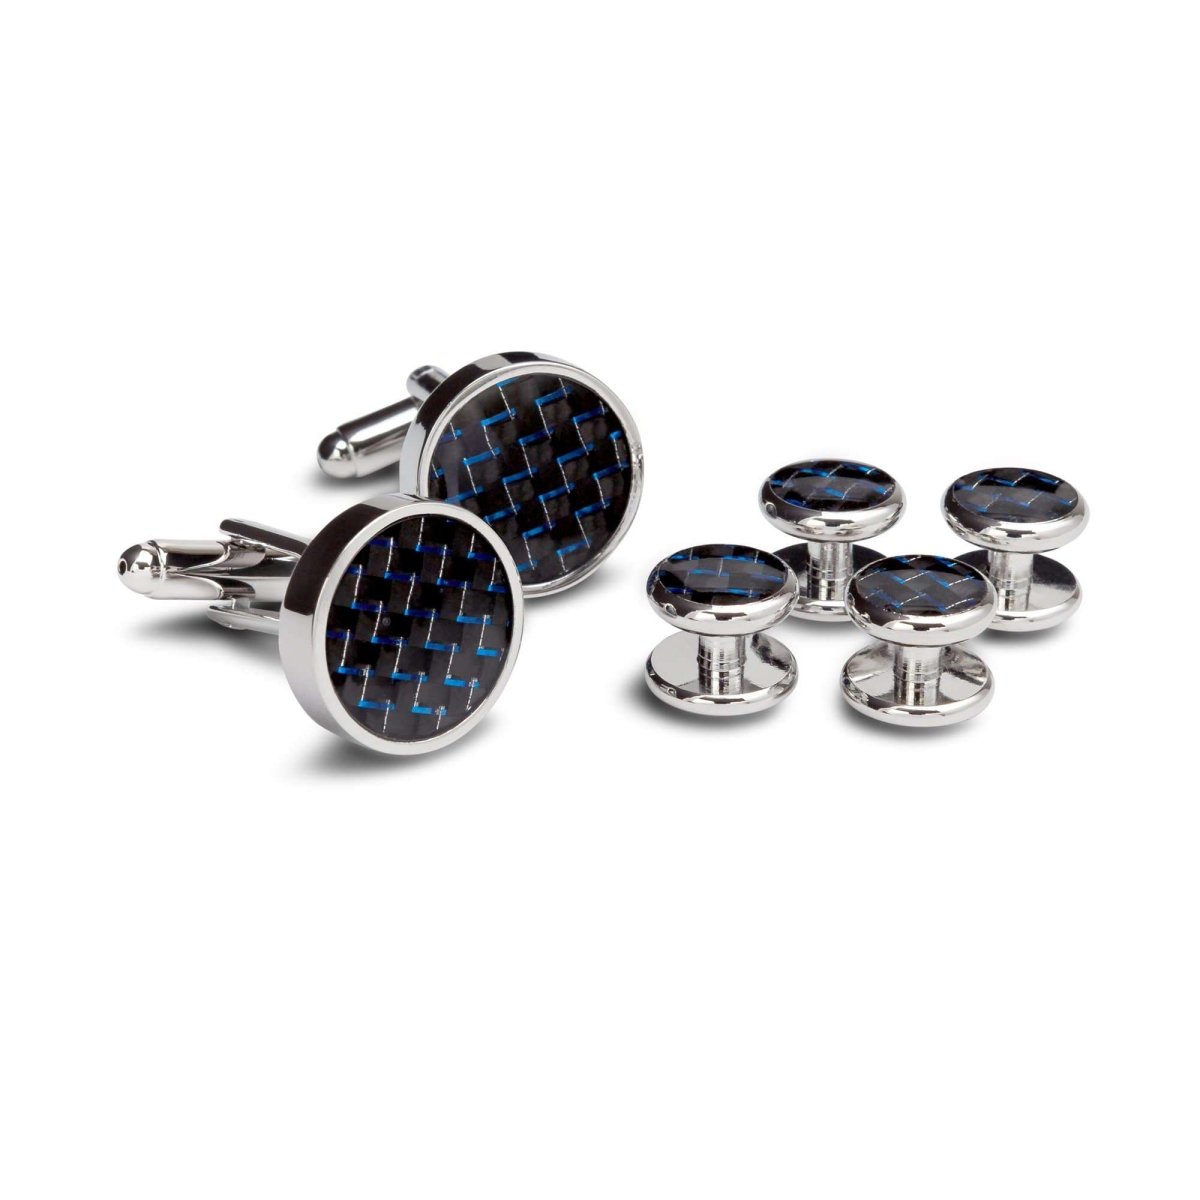 Knitted Black and Blue Cufflinks and Studs - MenSuits